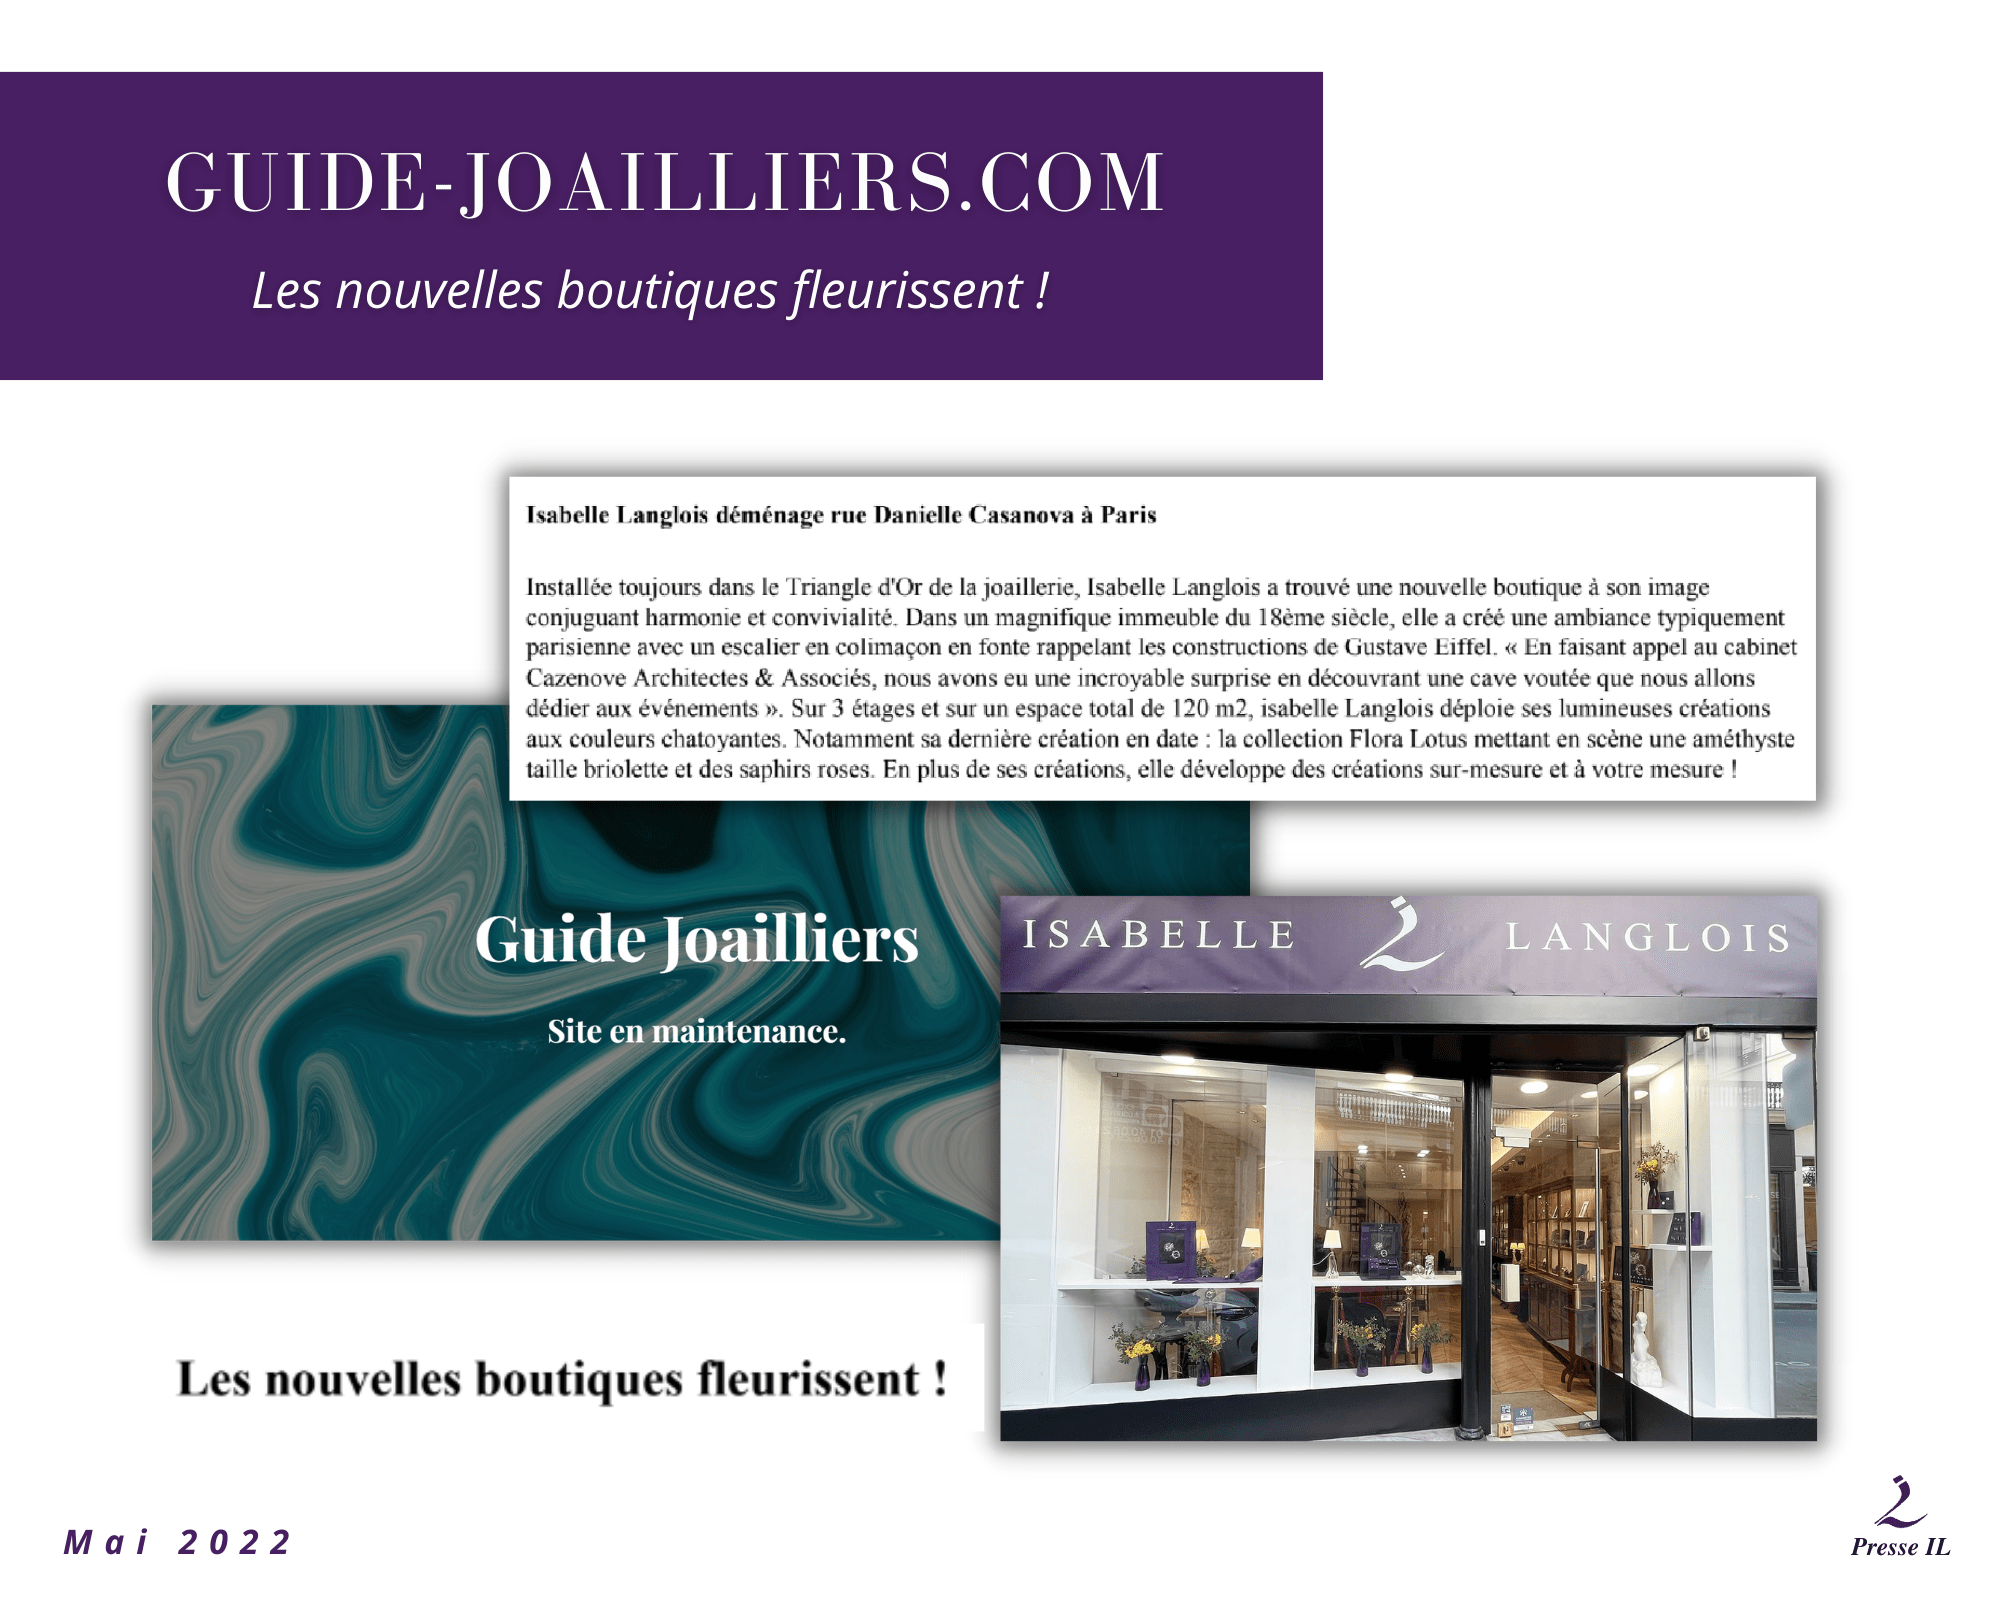 GUIDE-JOAILLIERS.COM